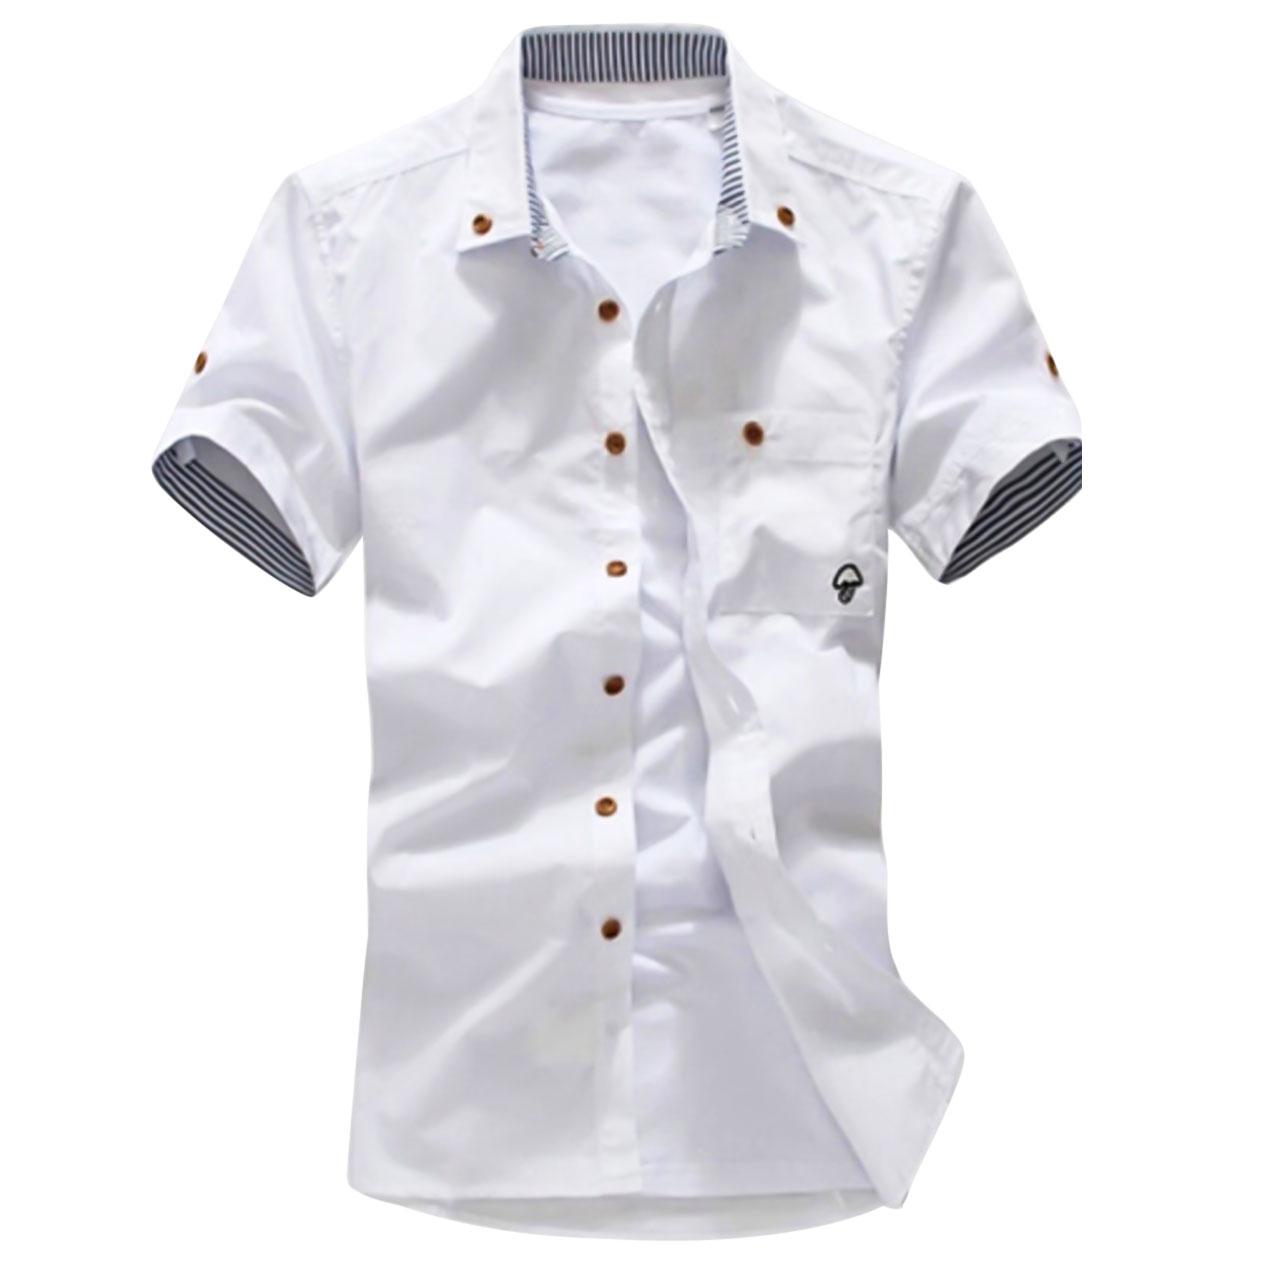 Men's Solid Colored Tops Plus Size White Button Down Shirt Short Sleeve With Collar